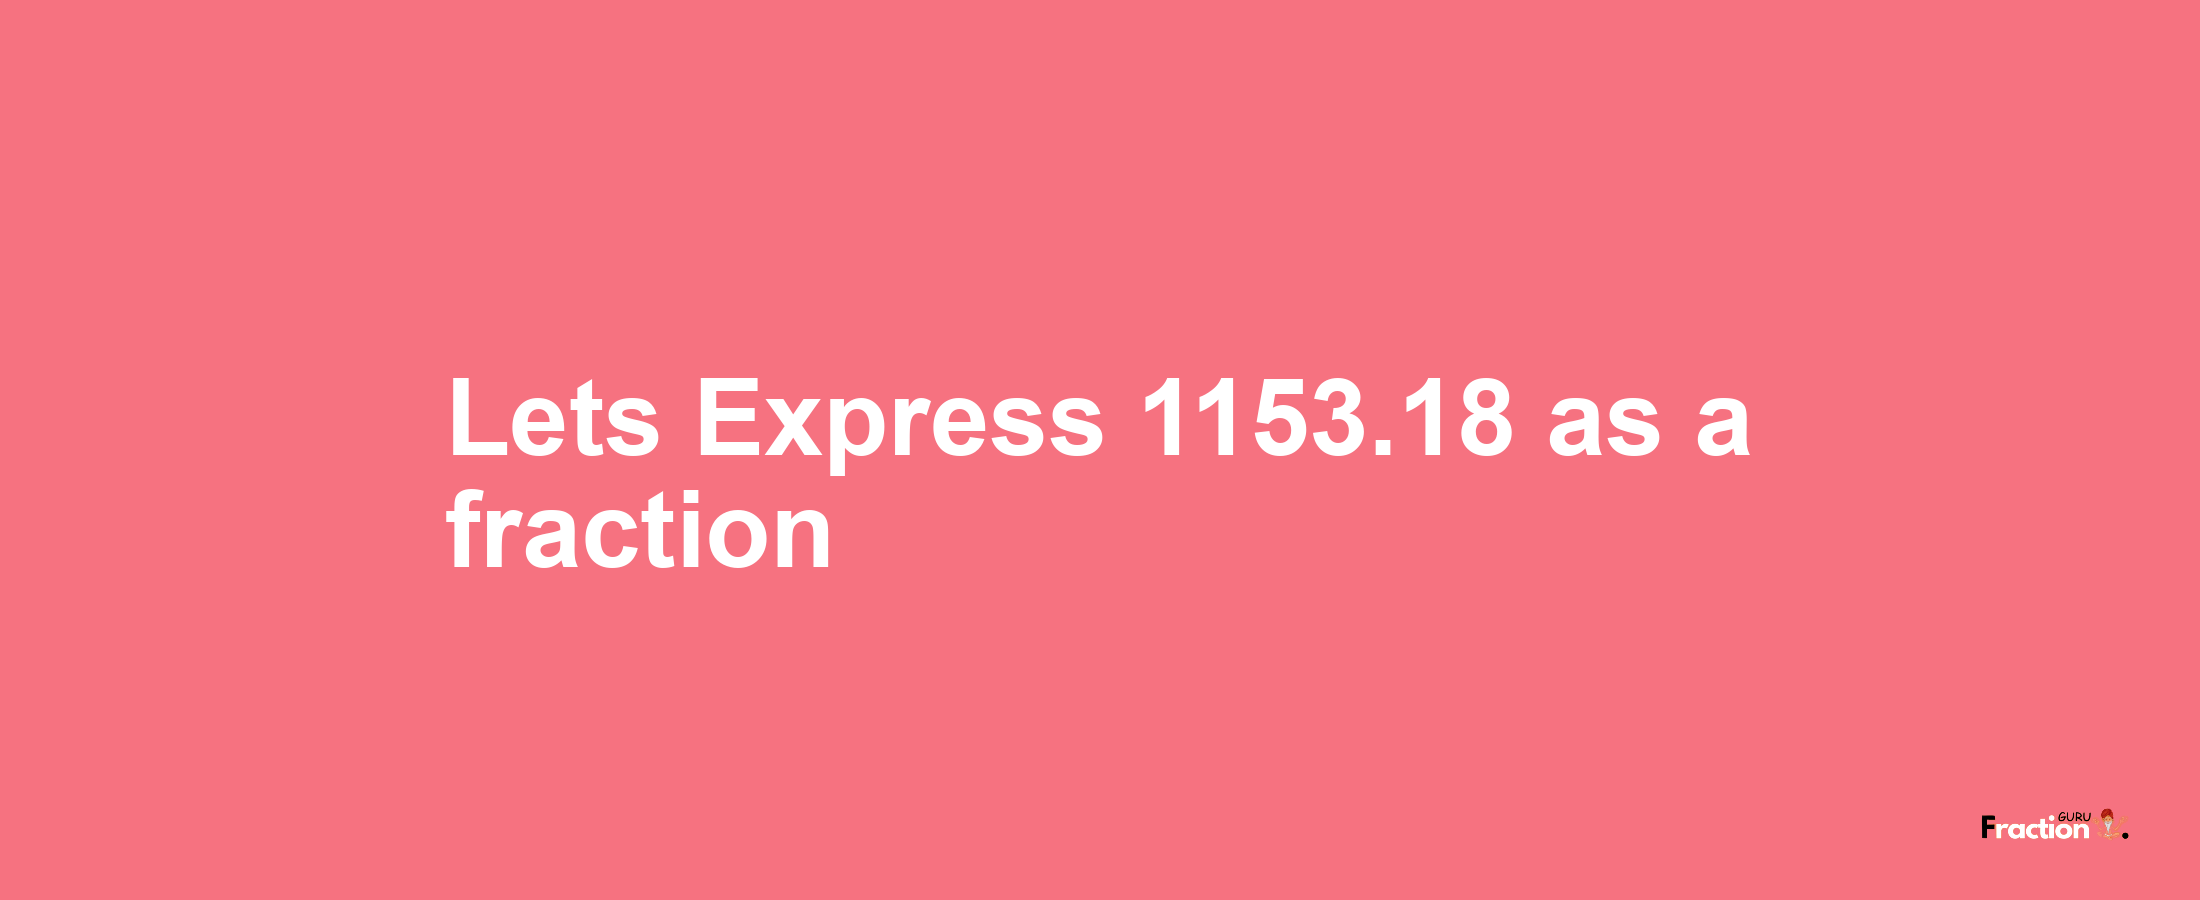 Lets Express 1153.18 as afraction